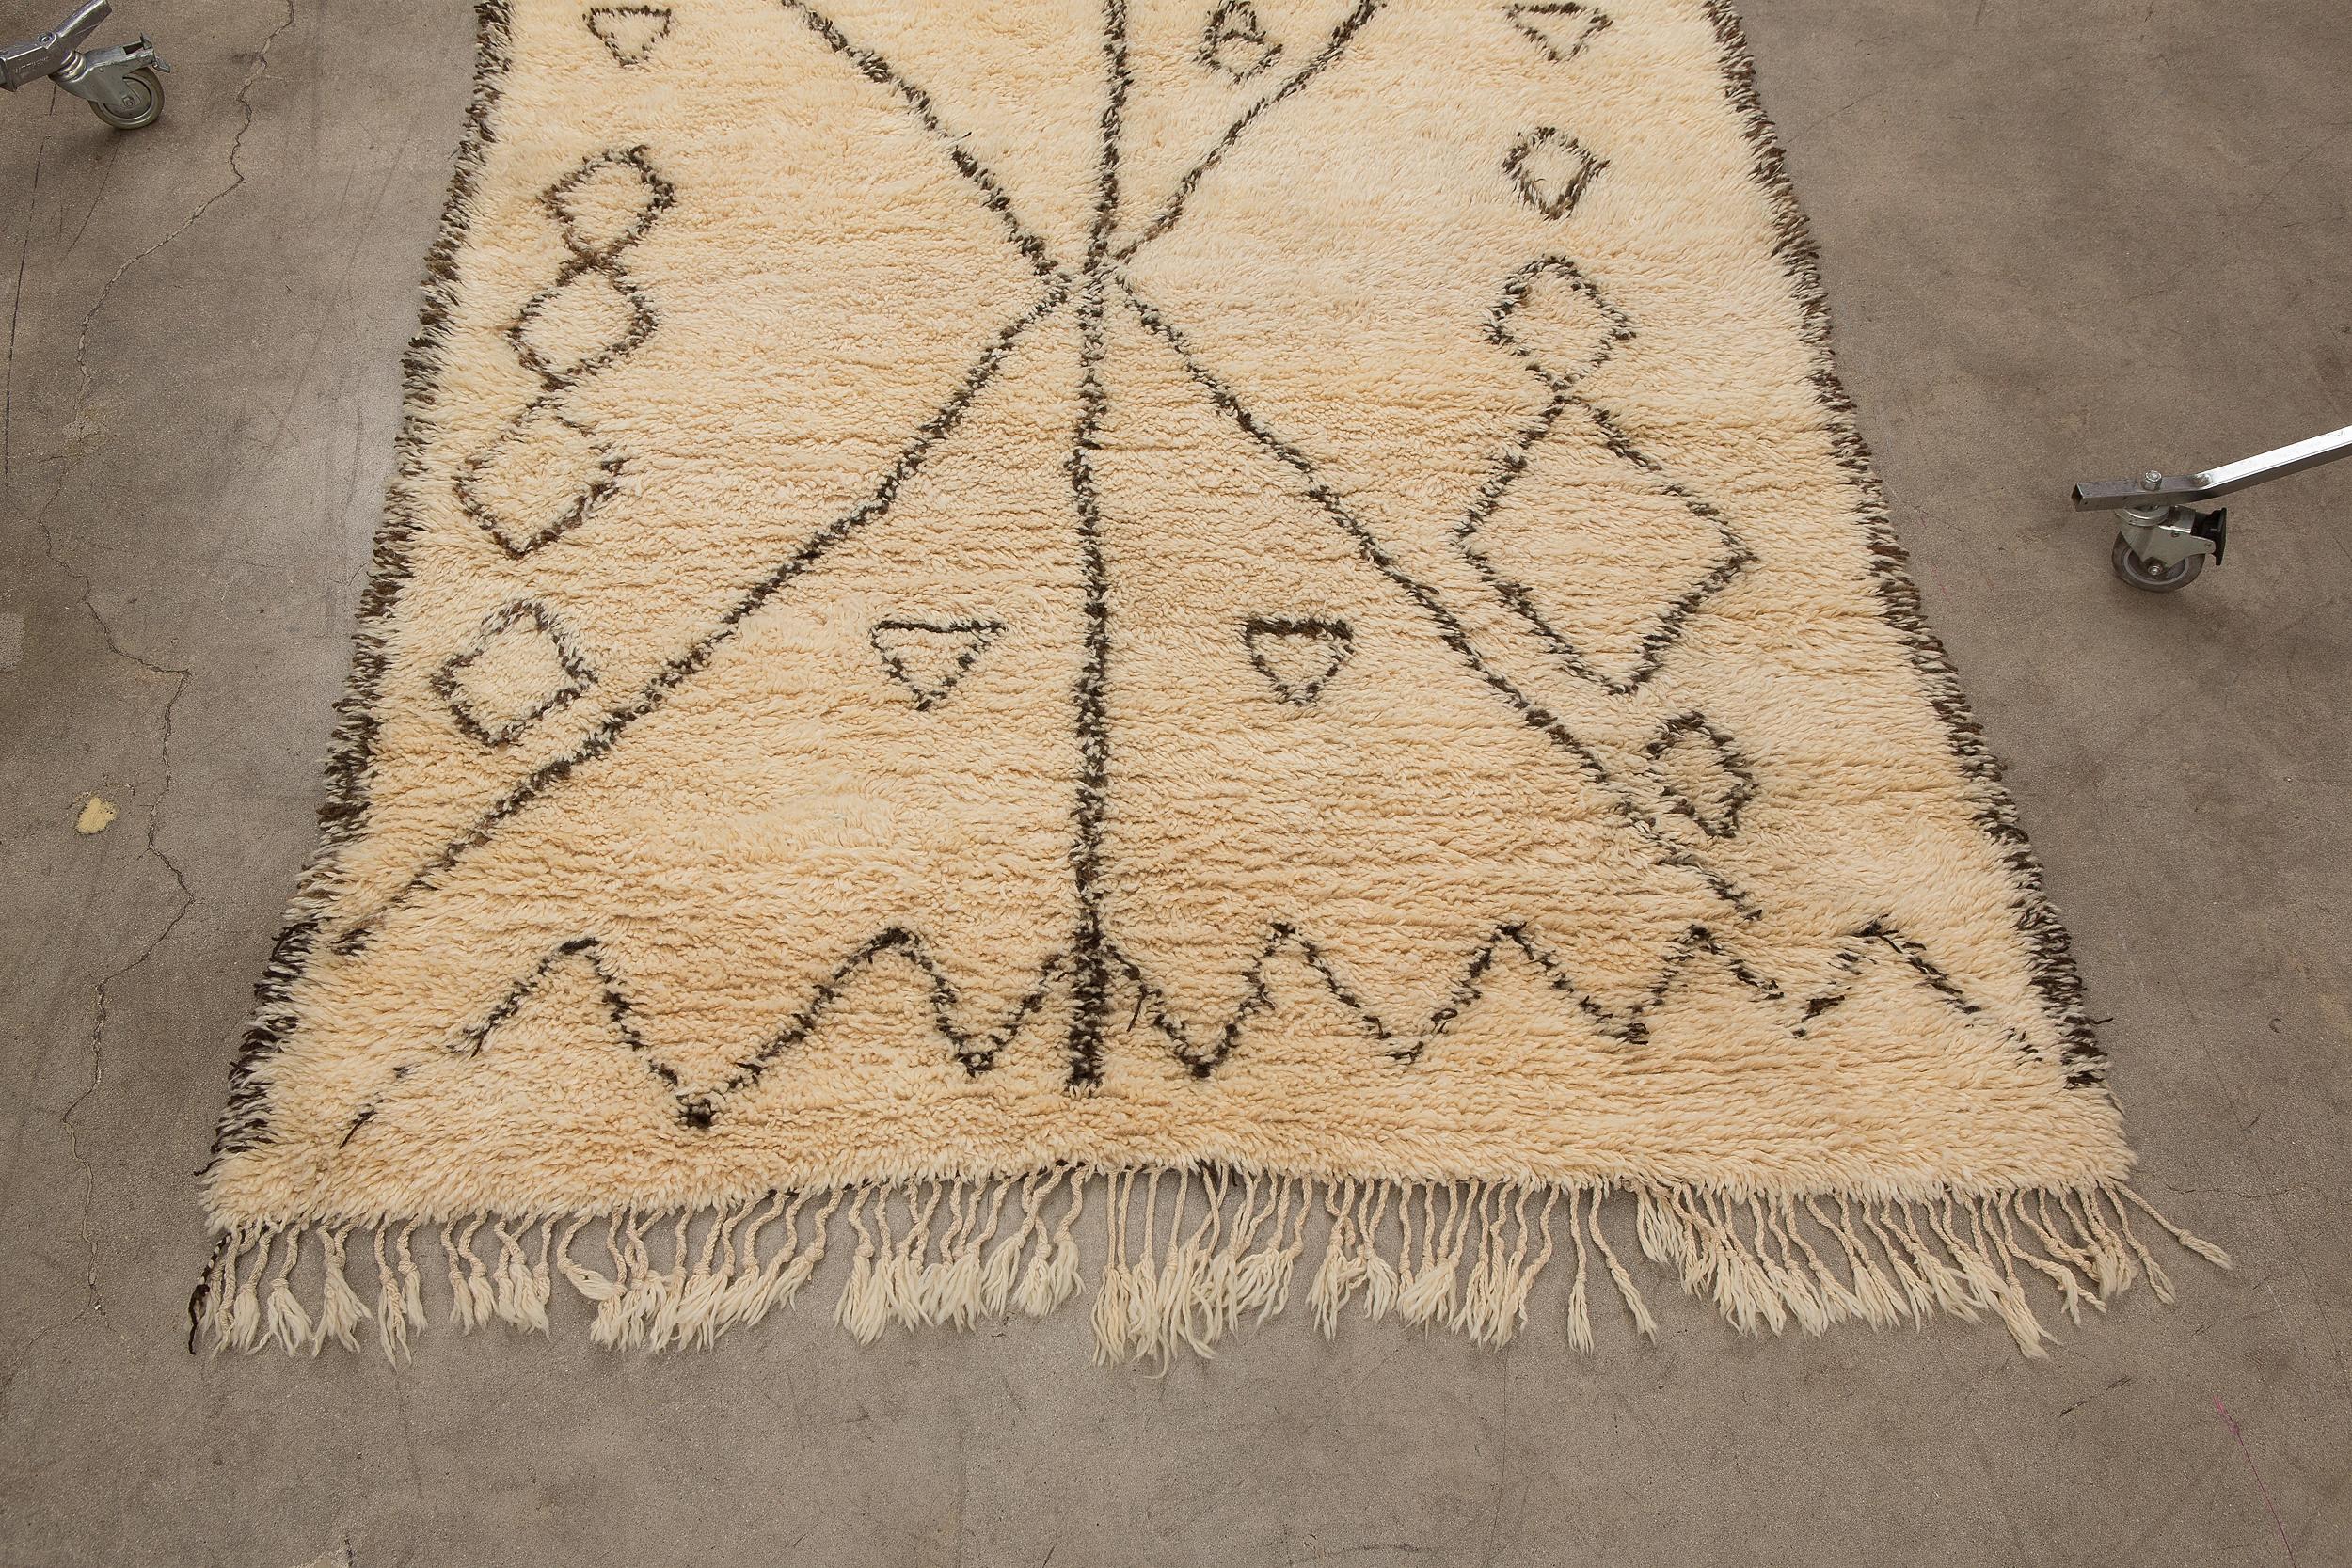 The Beni Ourain tribe resides in the Middle Atlas region of Morocco. Beni Ourain carpets possess a neutral geometric look which blends beautifully with the clean lines of modern furniture and architecture. Labeled 